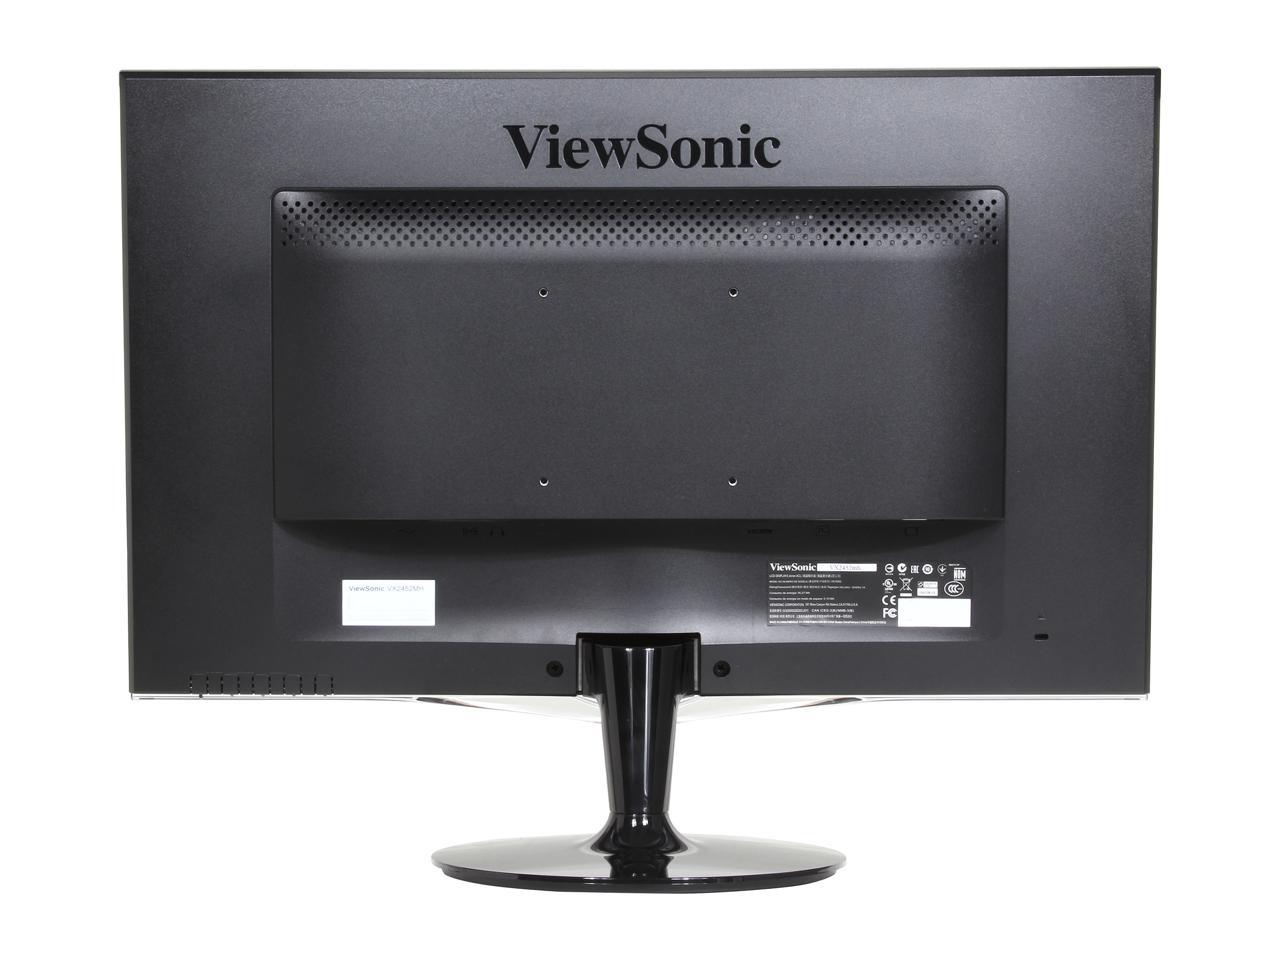 ViewSonic VX2452MH 24" (Actual size 23.6") Full HD 1920 x 1080 2ms (GTG) HDMI DVI-D VGA Built-in Speakers Anti-Glare LED Backlit LCD Gaming Monitor